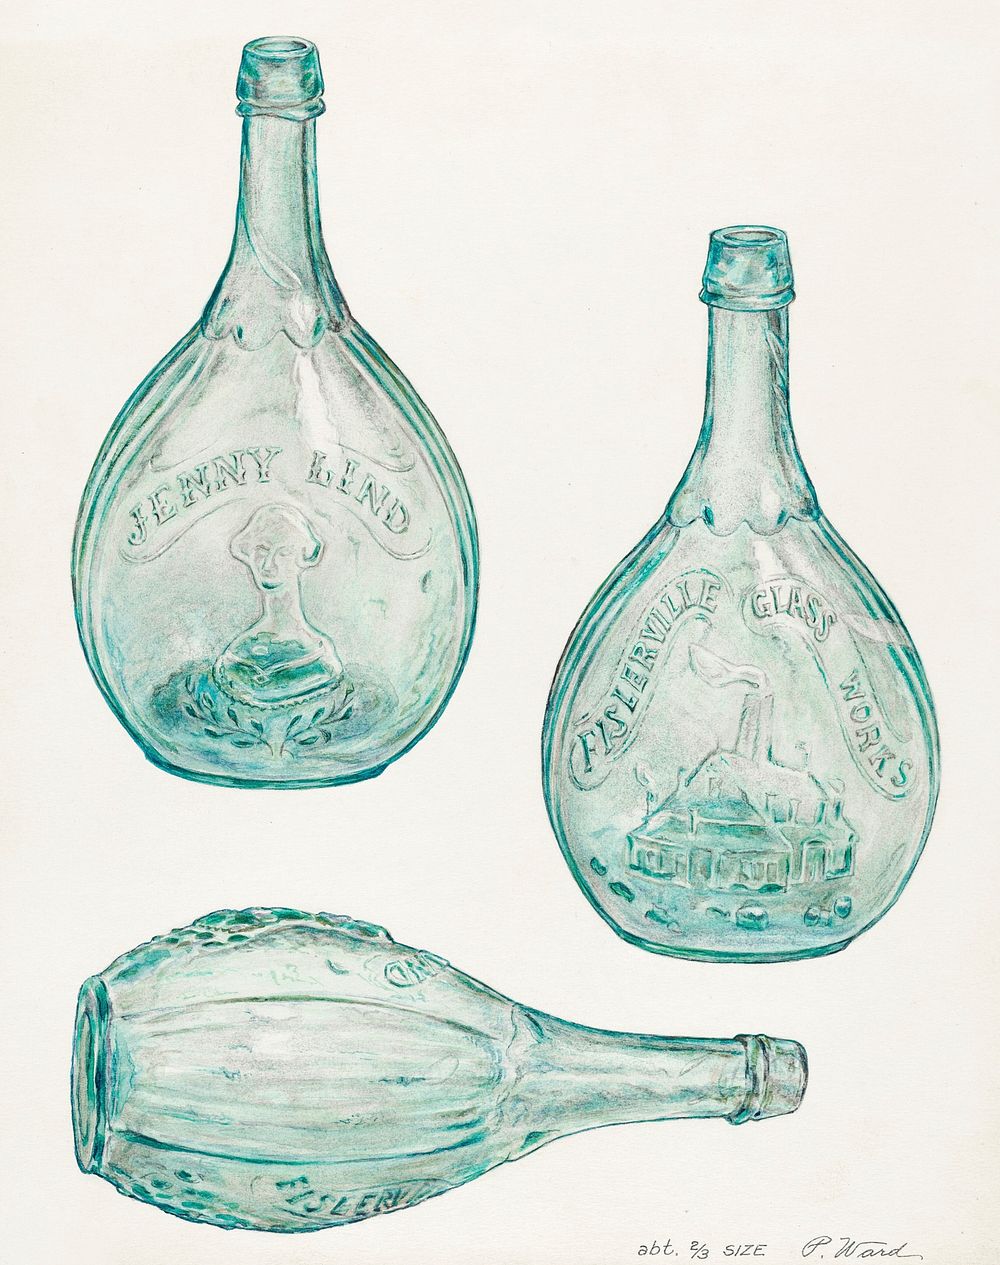 Jenny Lind Bottle (ca.1935) by Paul Ward. Original from The National Gallery of Art. Digitally enhanced by rawpixel.